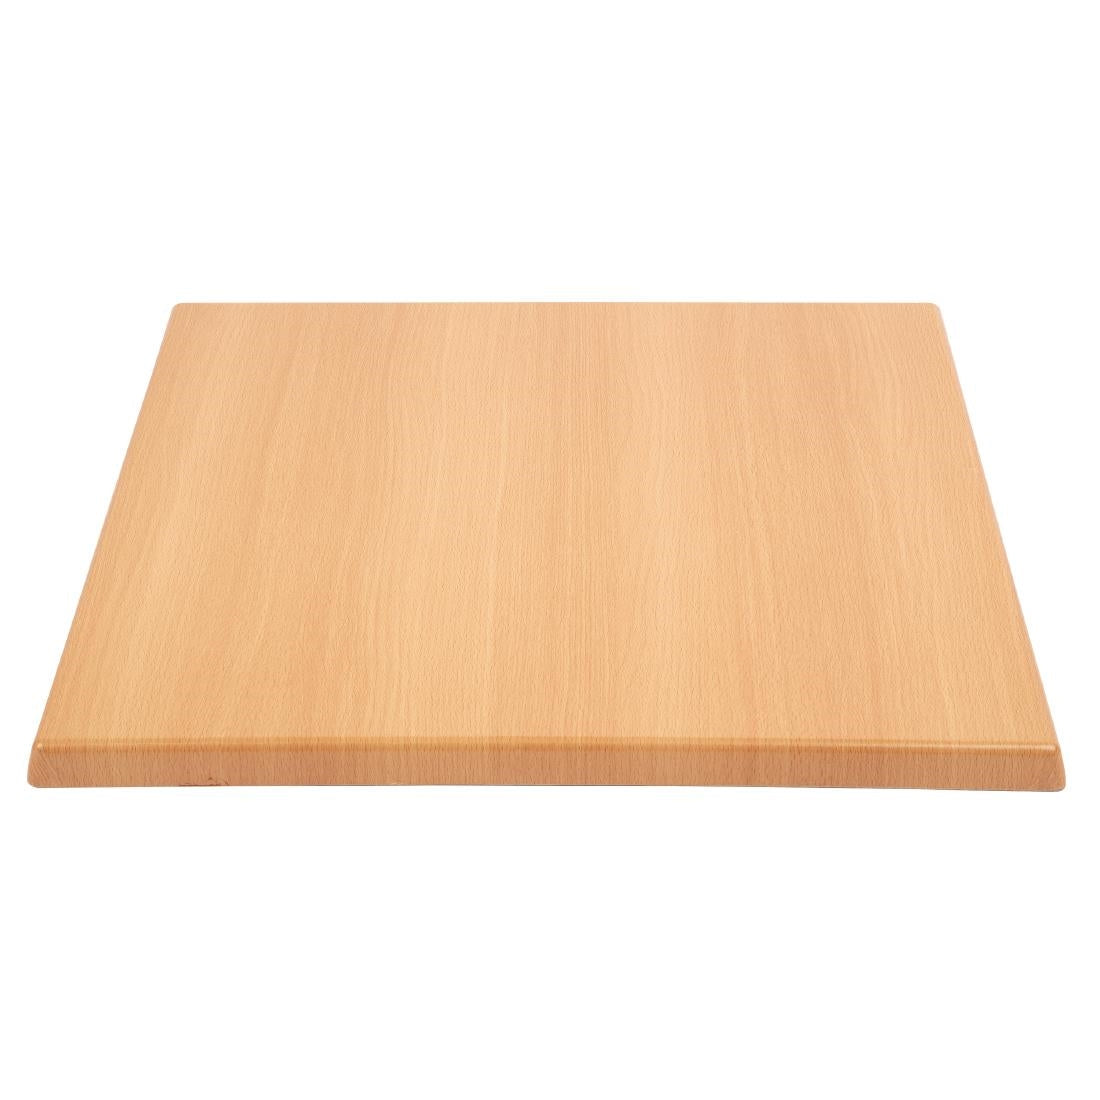 GG638 Bolero Pre-drilled Square Table Top Beech Effect 700mm JD Catering Equipment Solutions Ltd